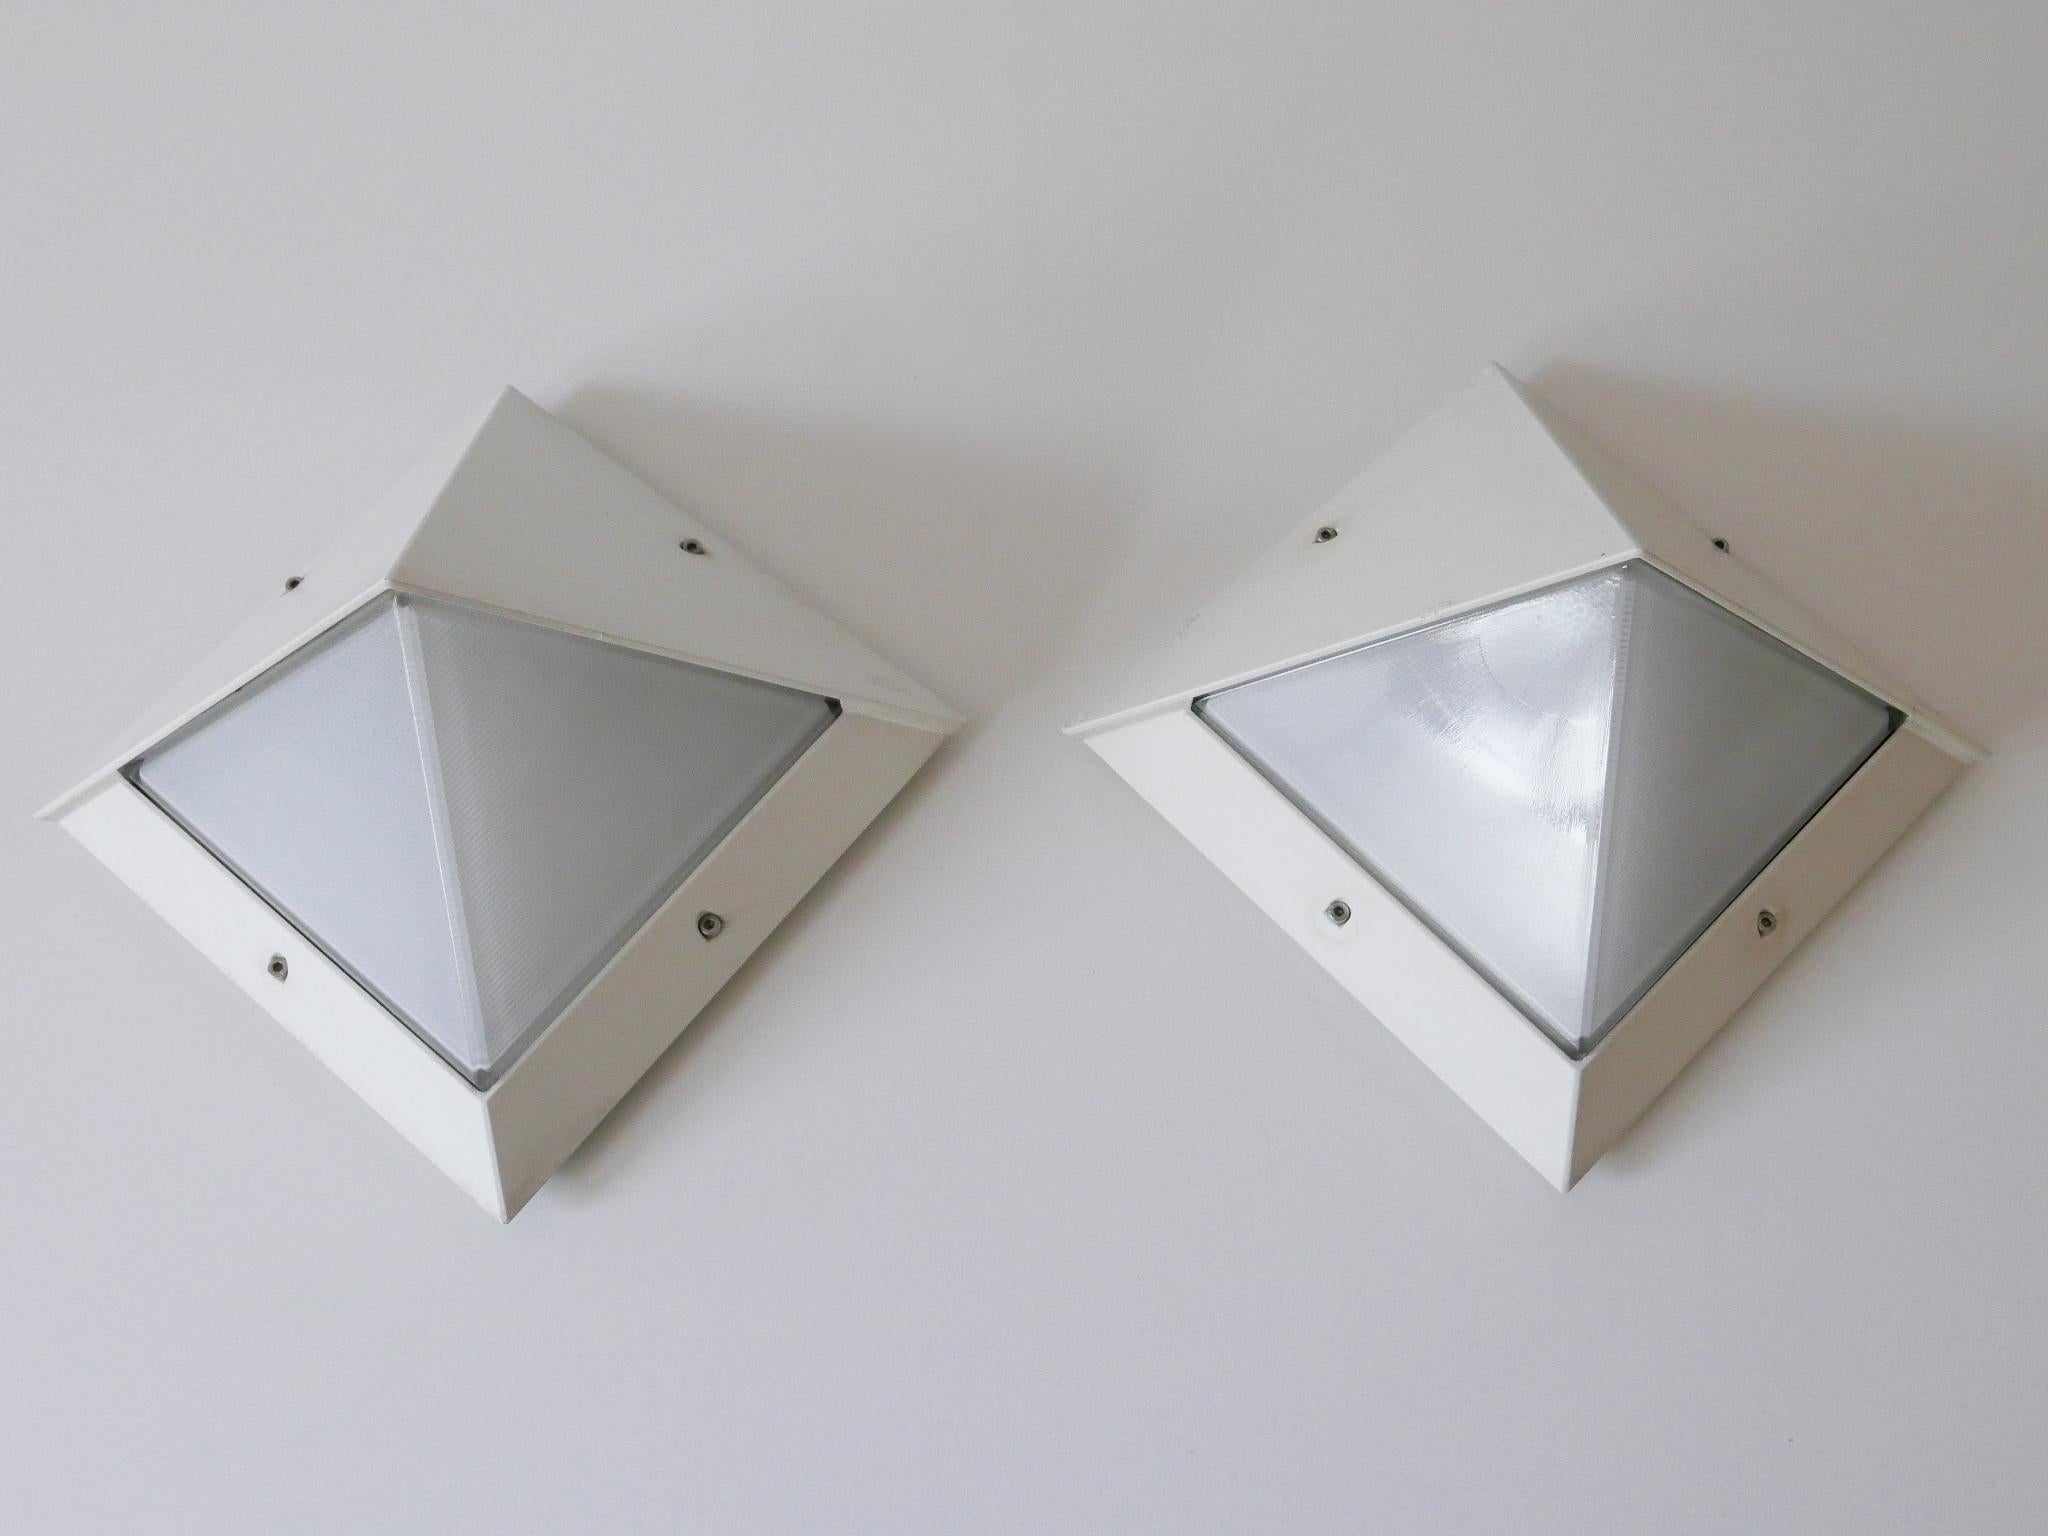 Set of Two Medium Outdoor Wall Lamps or Sconces by BEGA, 1980s, Germany For Sale 2